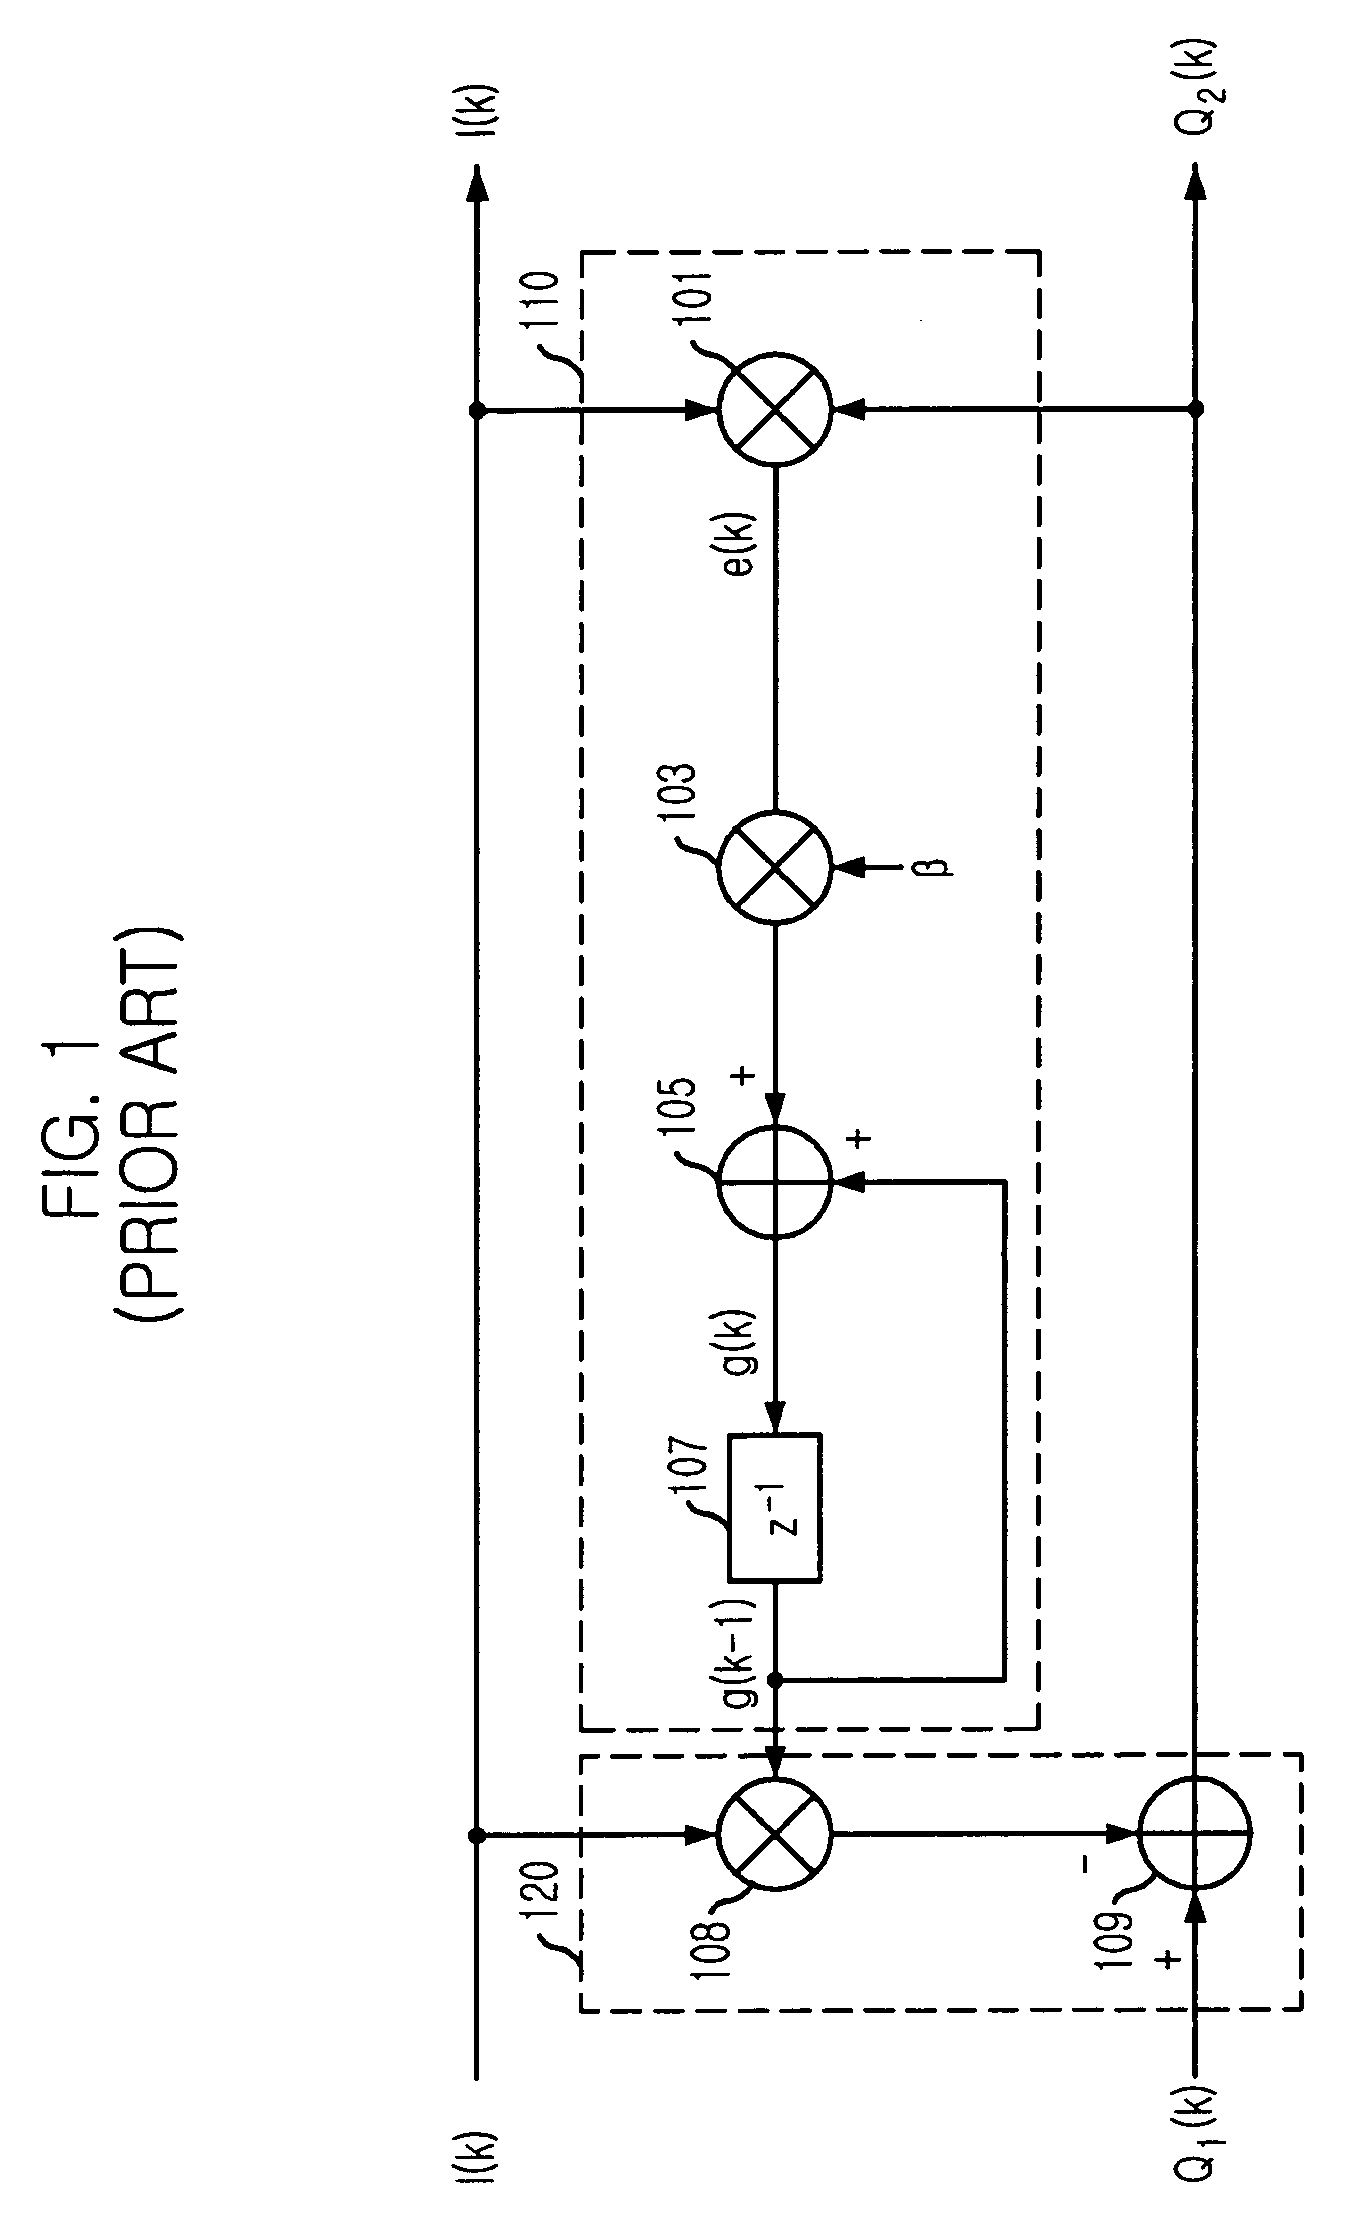 Method and apparatus for compensating I/Q imbalance by using variable loop gain in quadrature demodulator